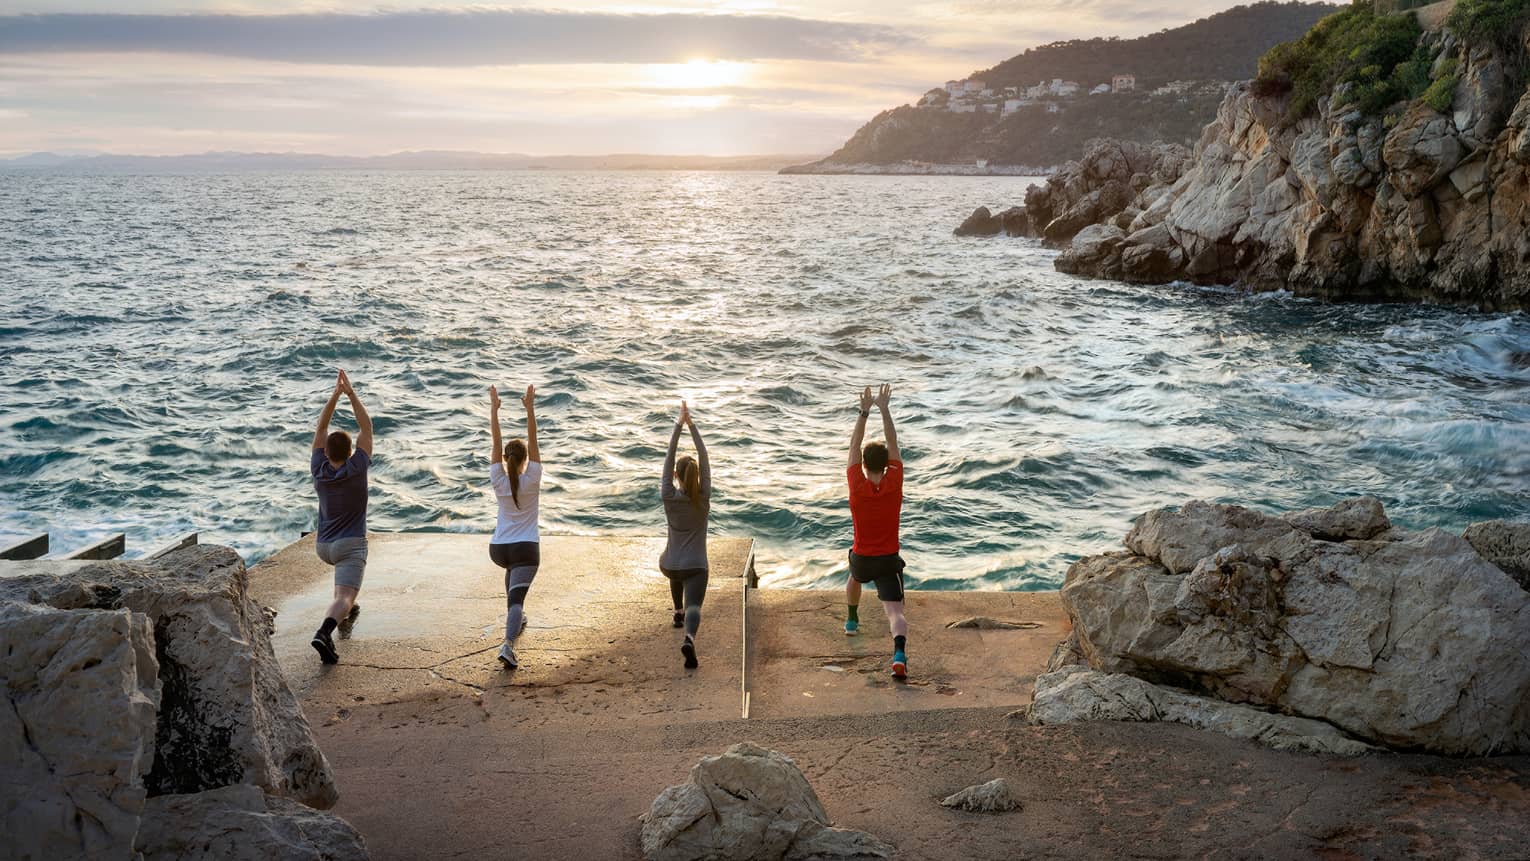 Rear view of four people doing yoga on sandy shore next to sea, rocky cliffs on right